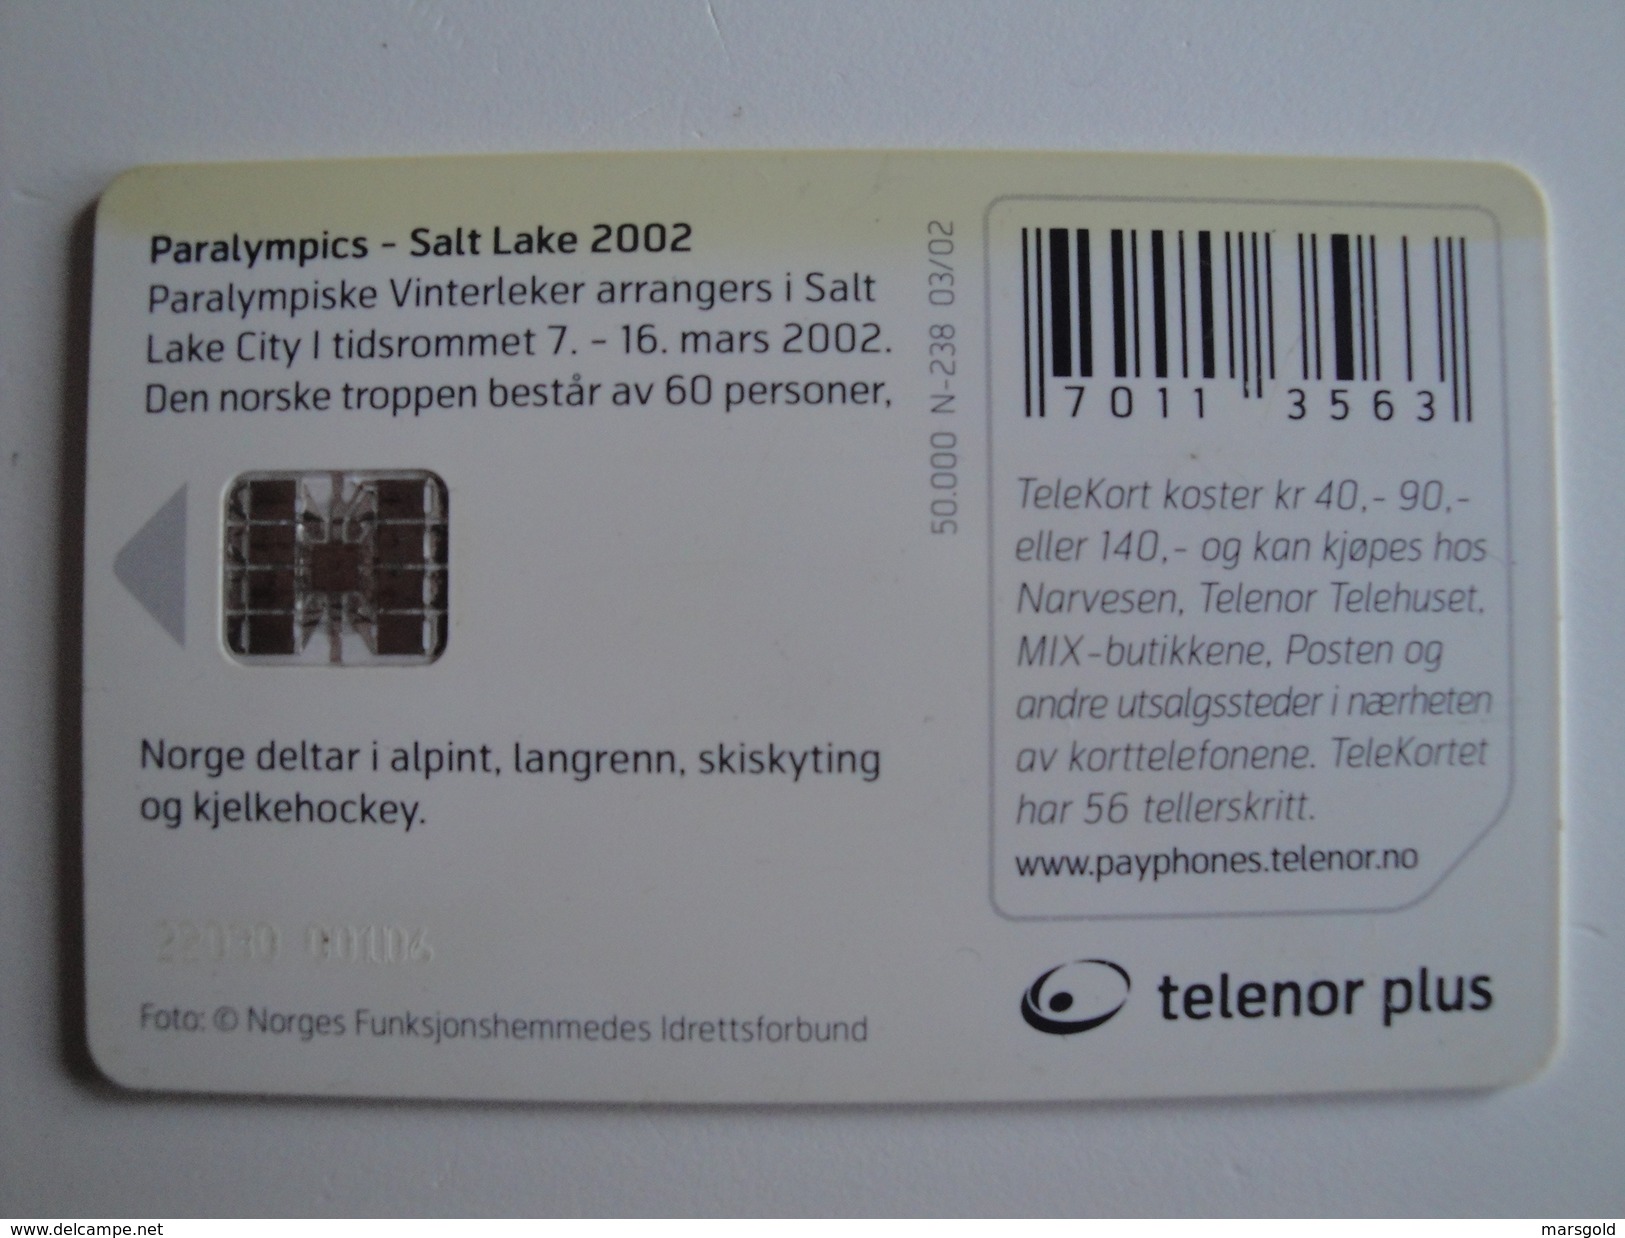 1 Chip Phonecard From Norway - Sky - SC7 - Batch 22030 001D6 - Norway